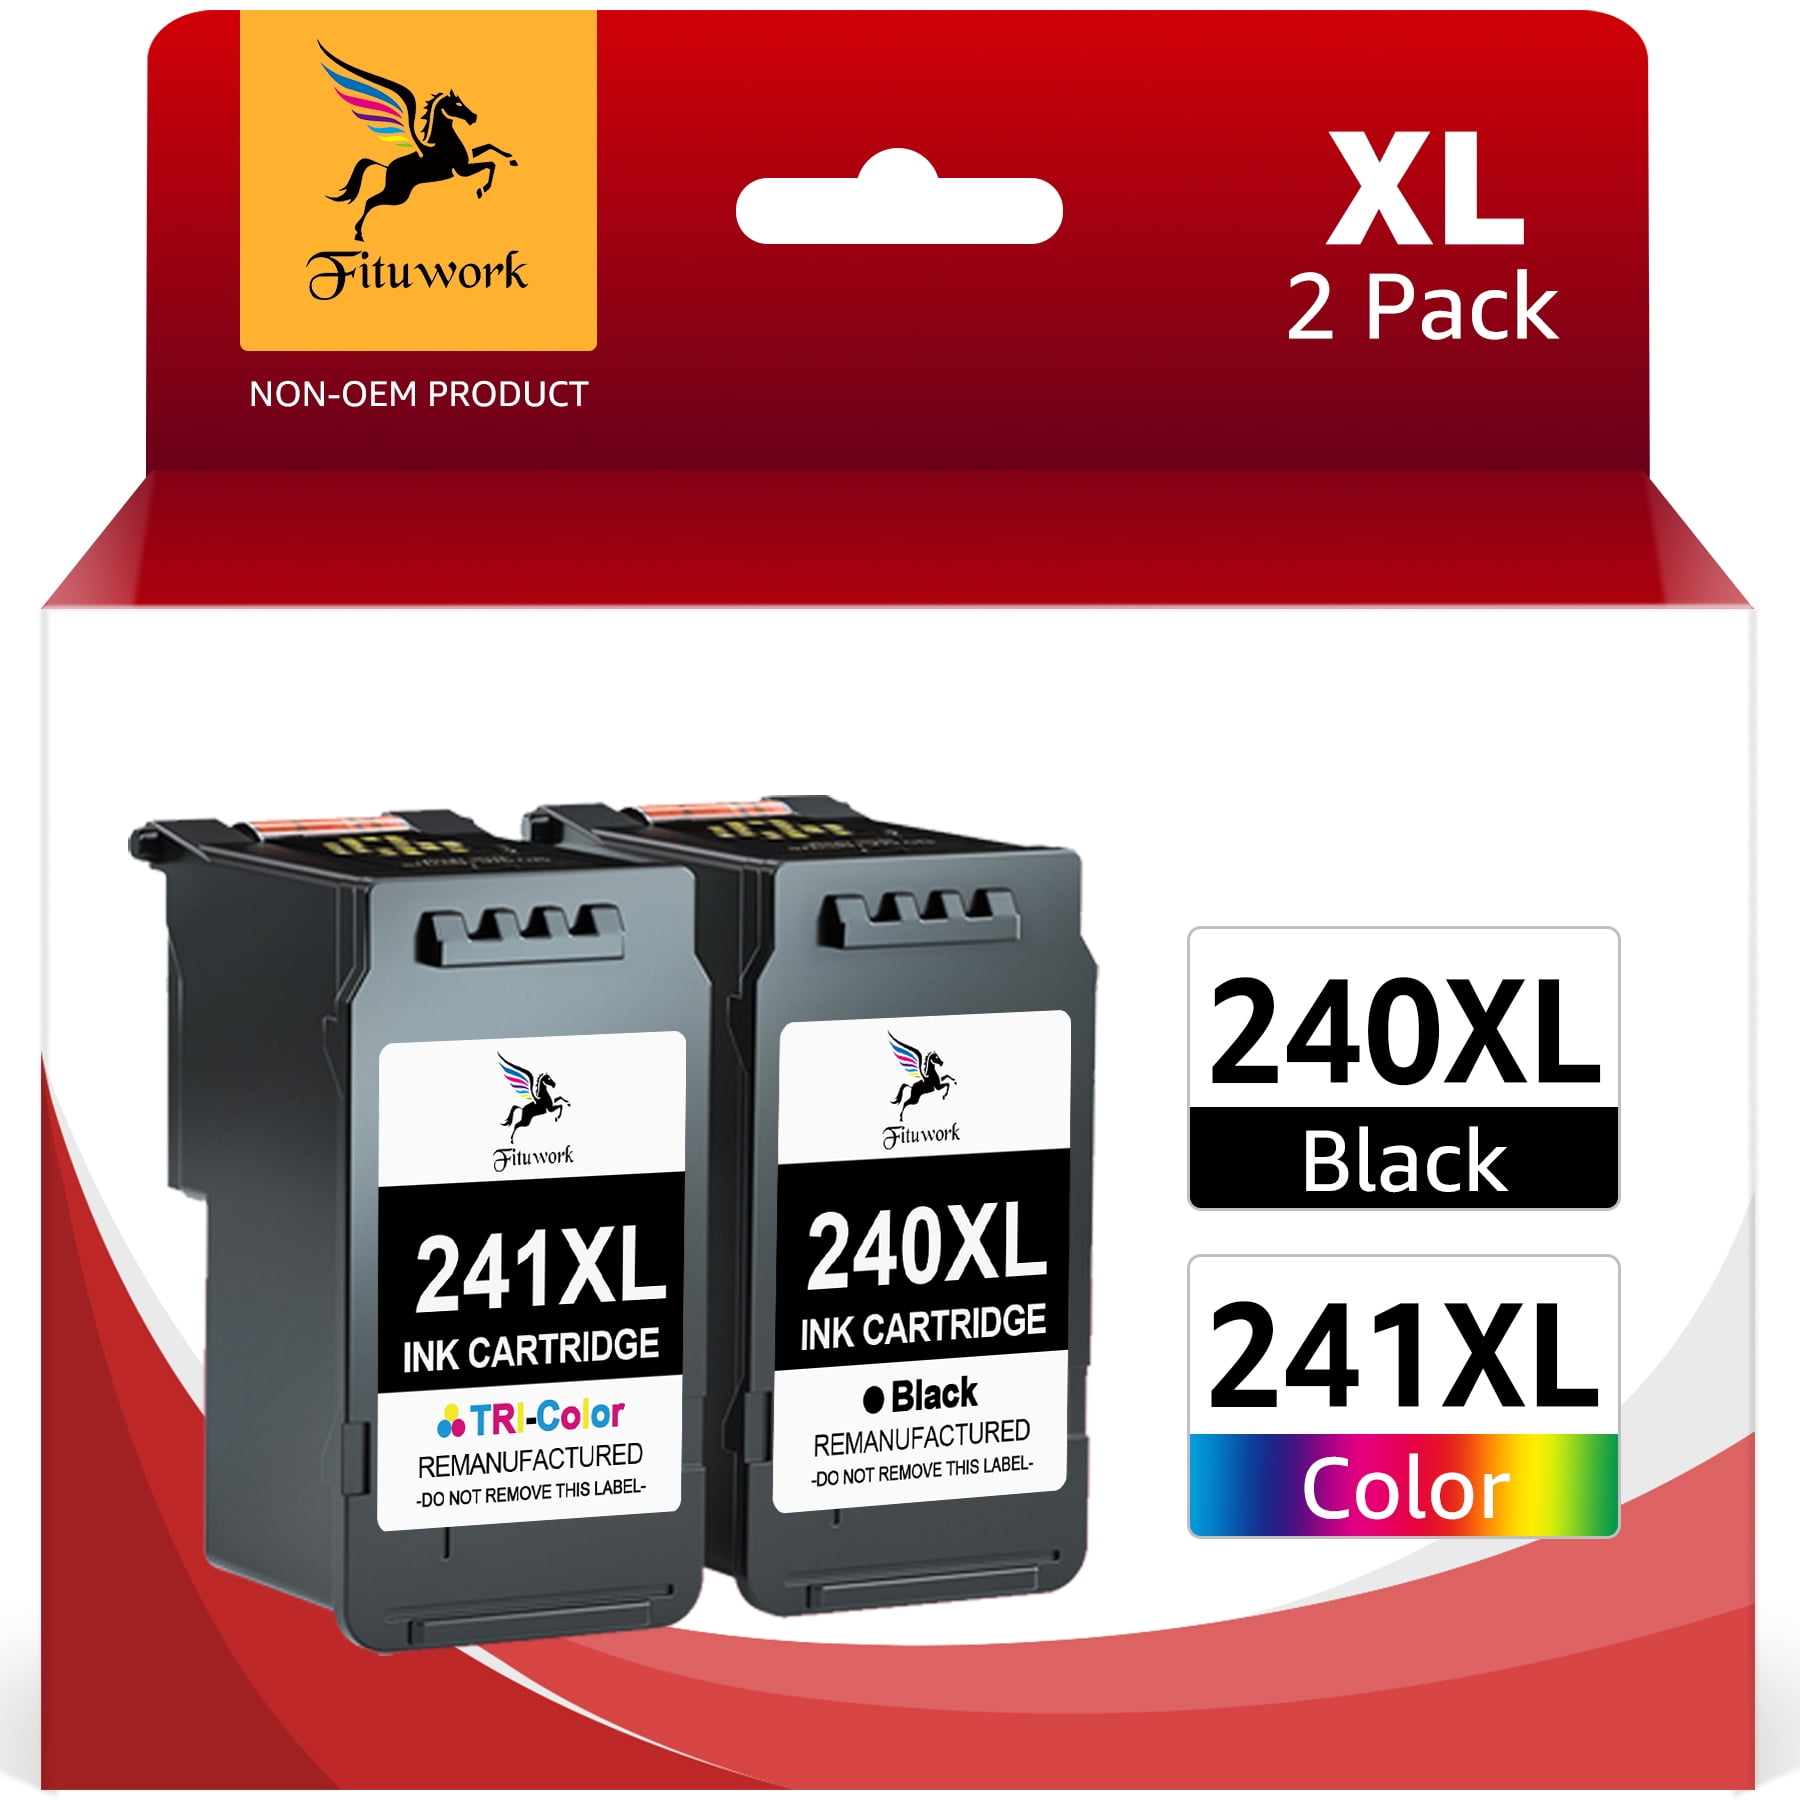 For Canon Mx515 Ts5150 Ts5151 Ink Cartridge For Canon Pixma Mx515 Ts5150  Ts5151 Printer Ink Cartridge Pg540 - Ink Cartridges - AliExpress